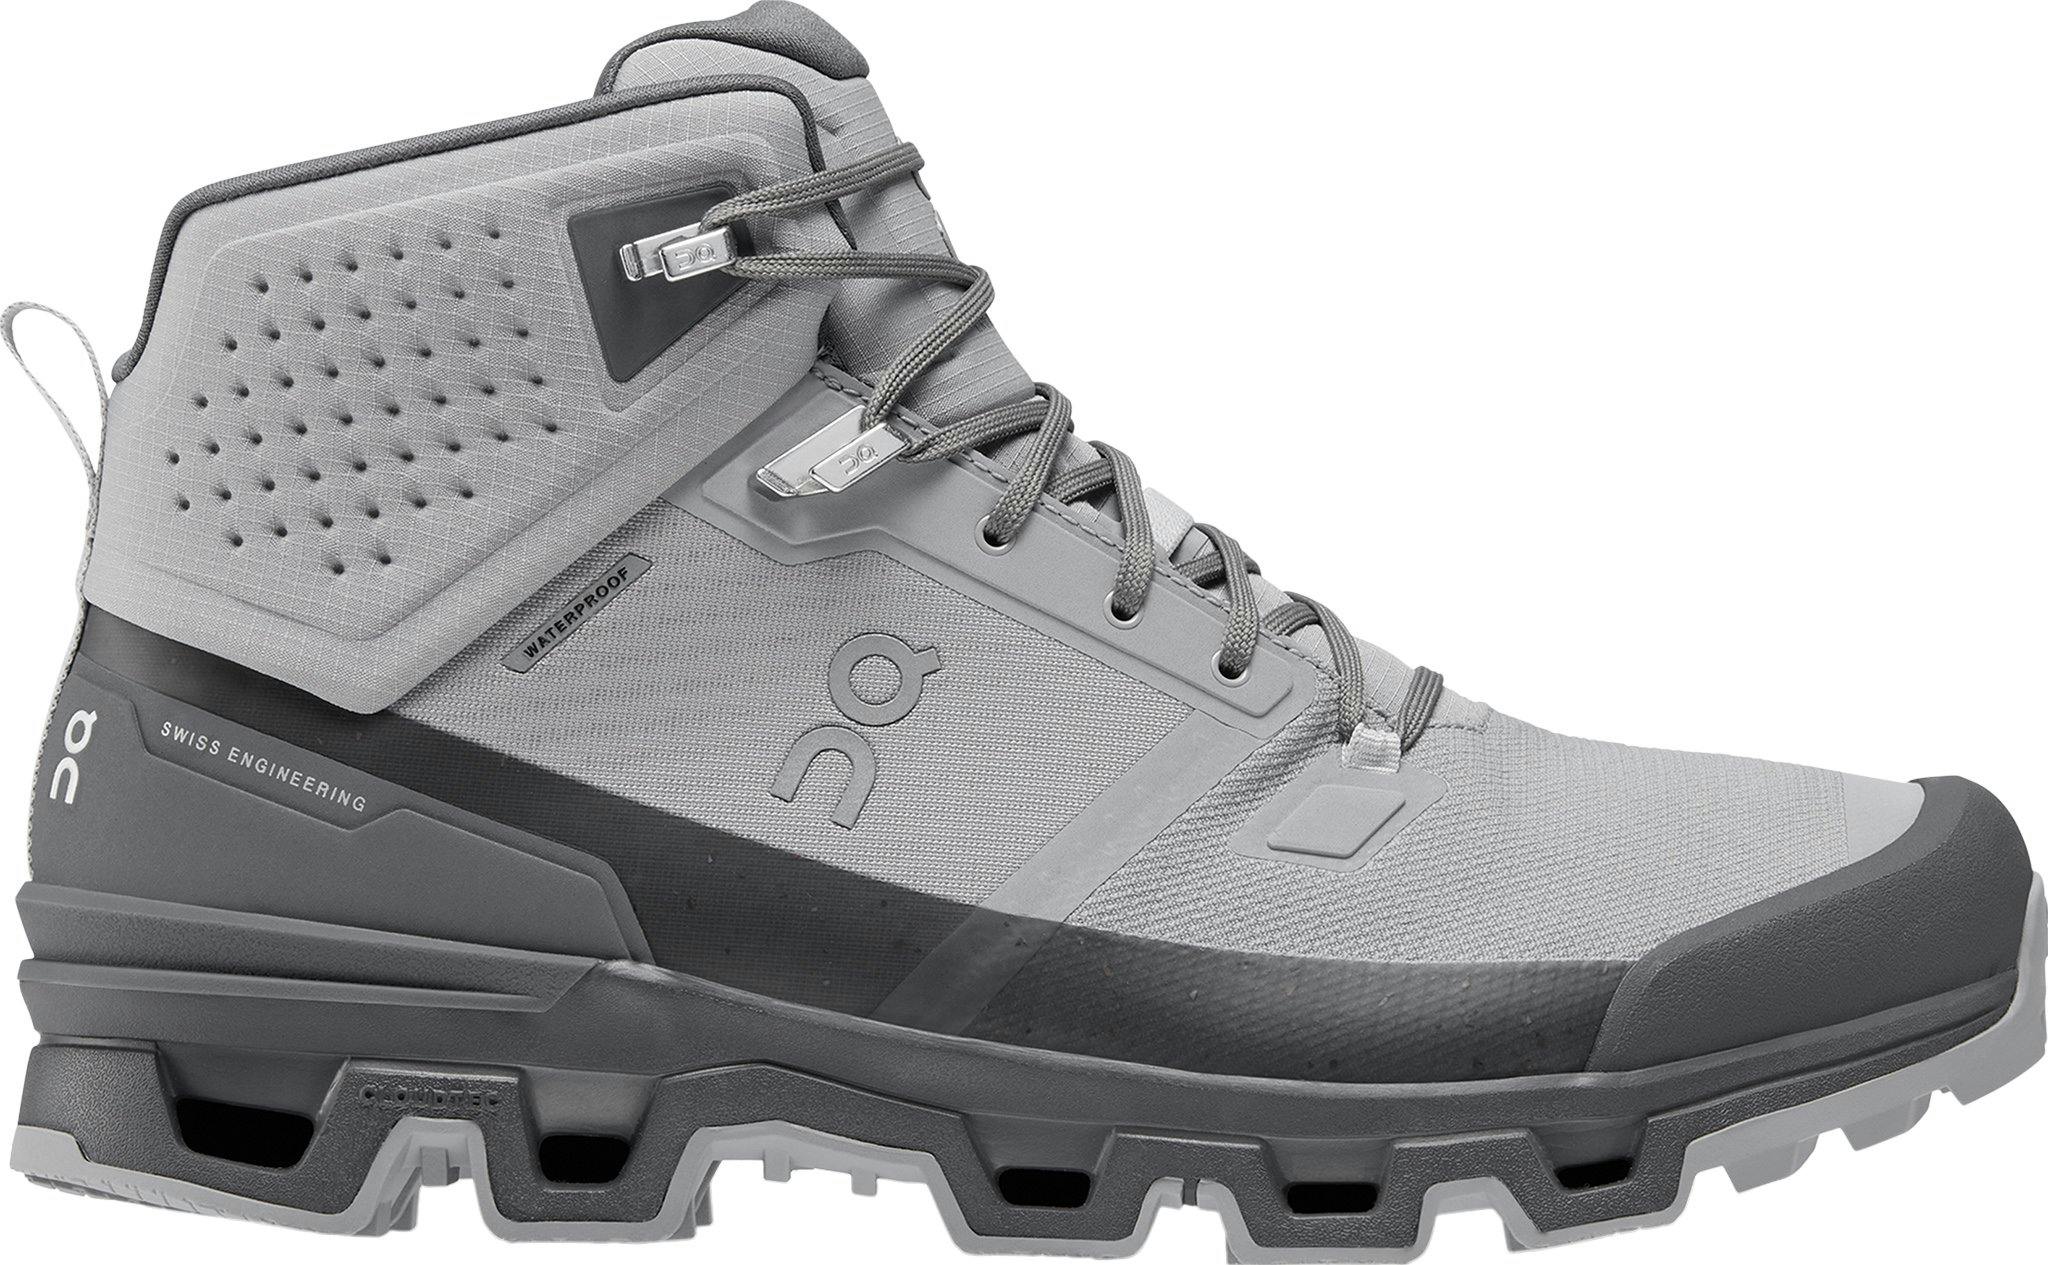 Product image for Cloudrock 2 Waterproof Hiking Boots - Men's